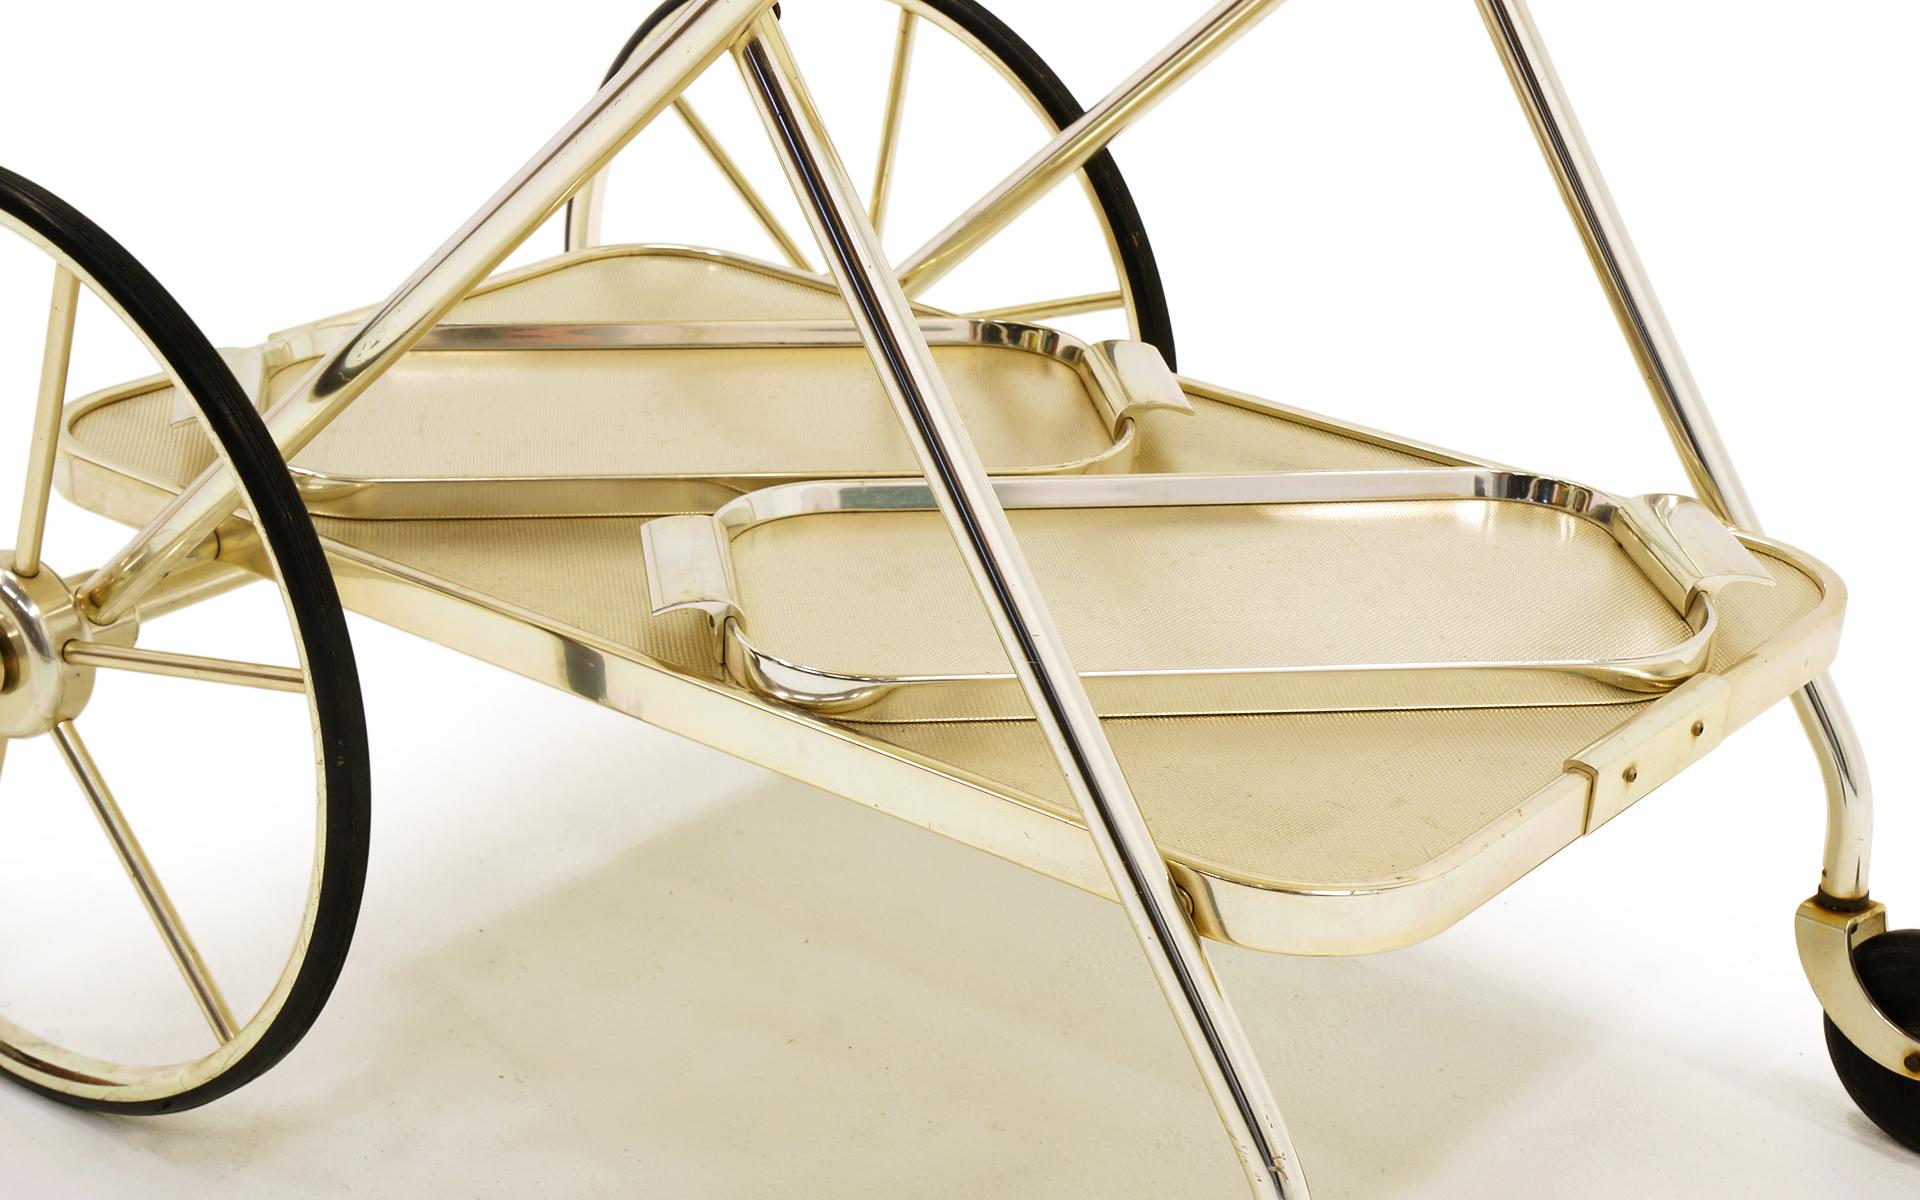 British Bar / Serving Cart with Trays. Anodized Aluminum, Stainless and Chromed Steel.